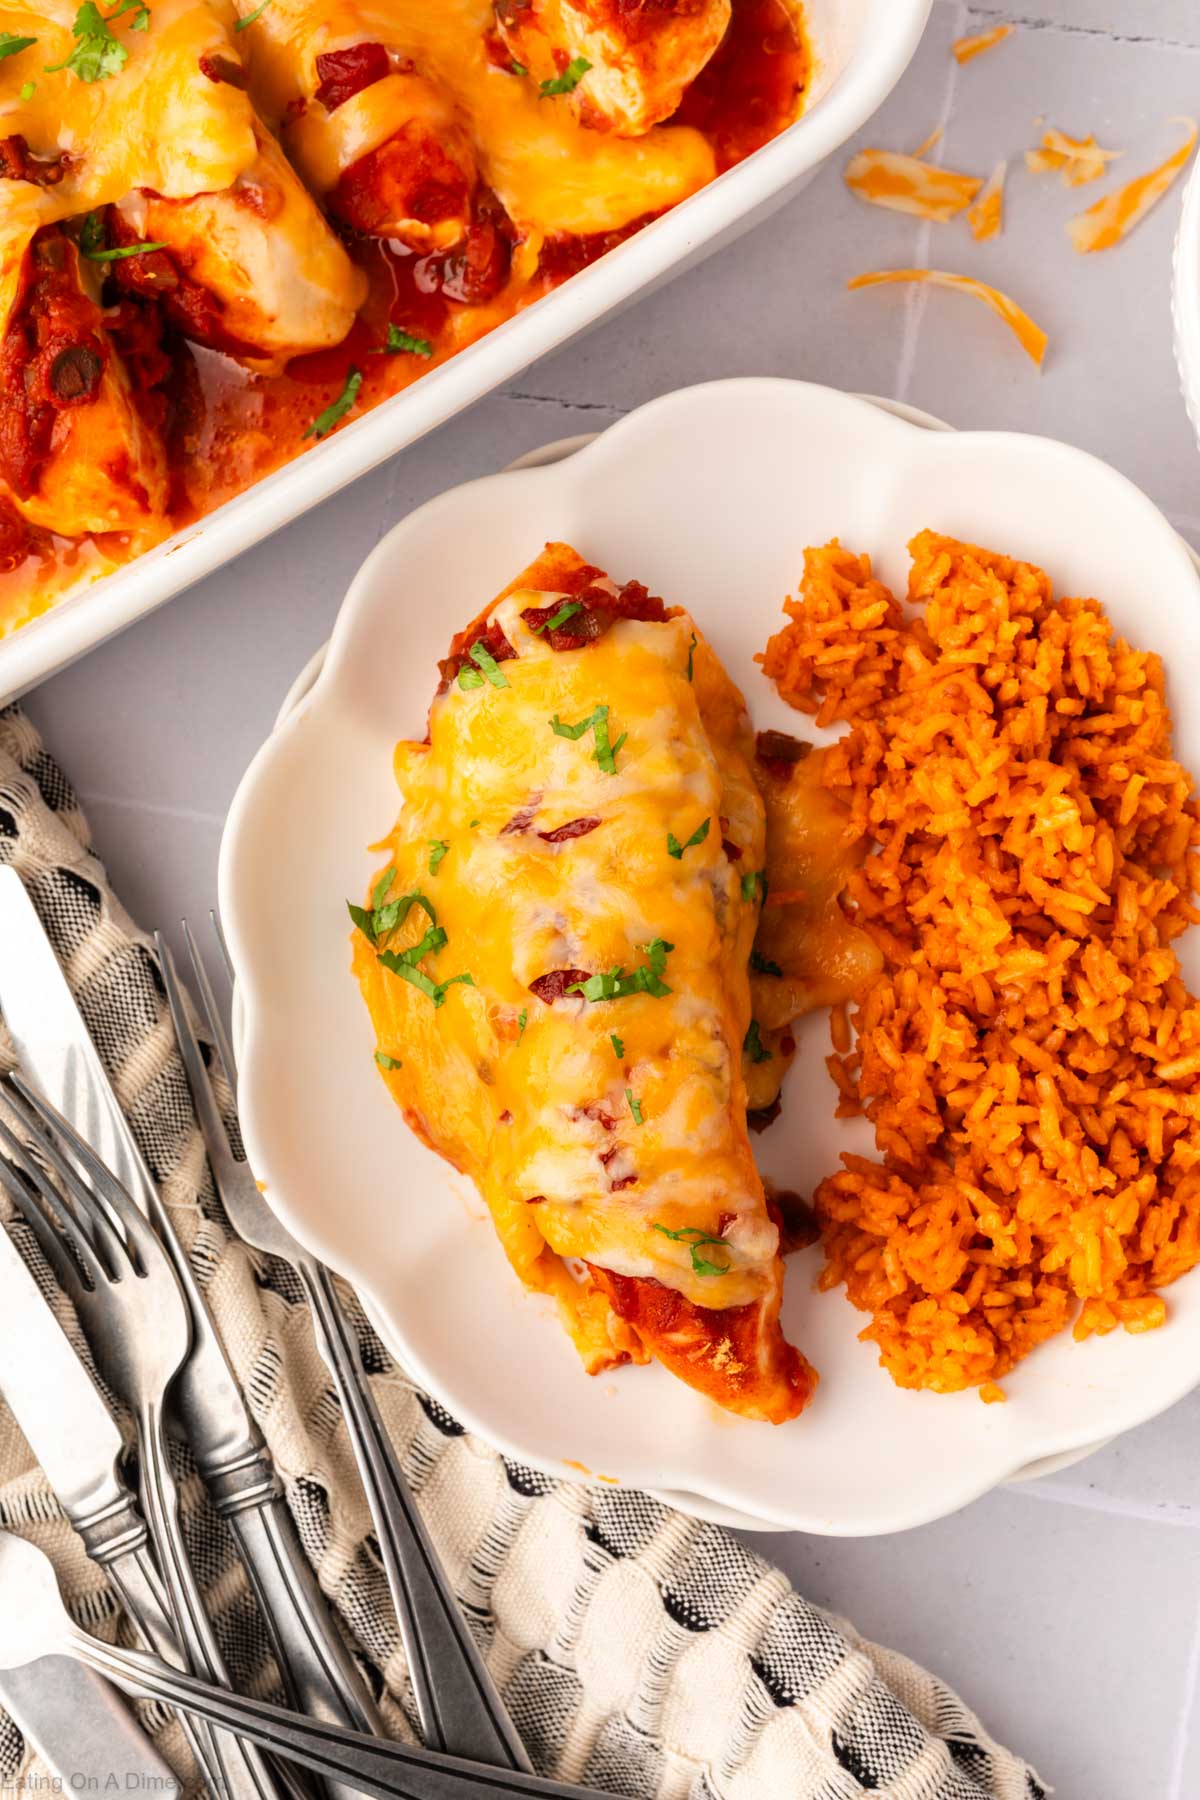 Baked chicken on a plate with spanish rice